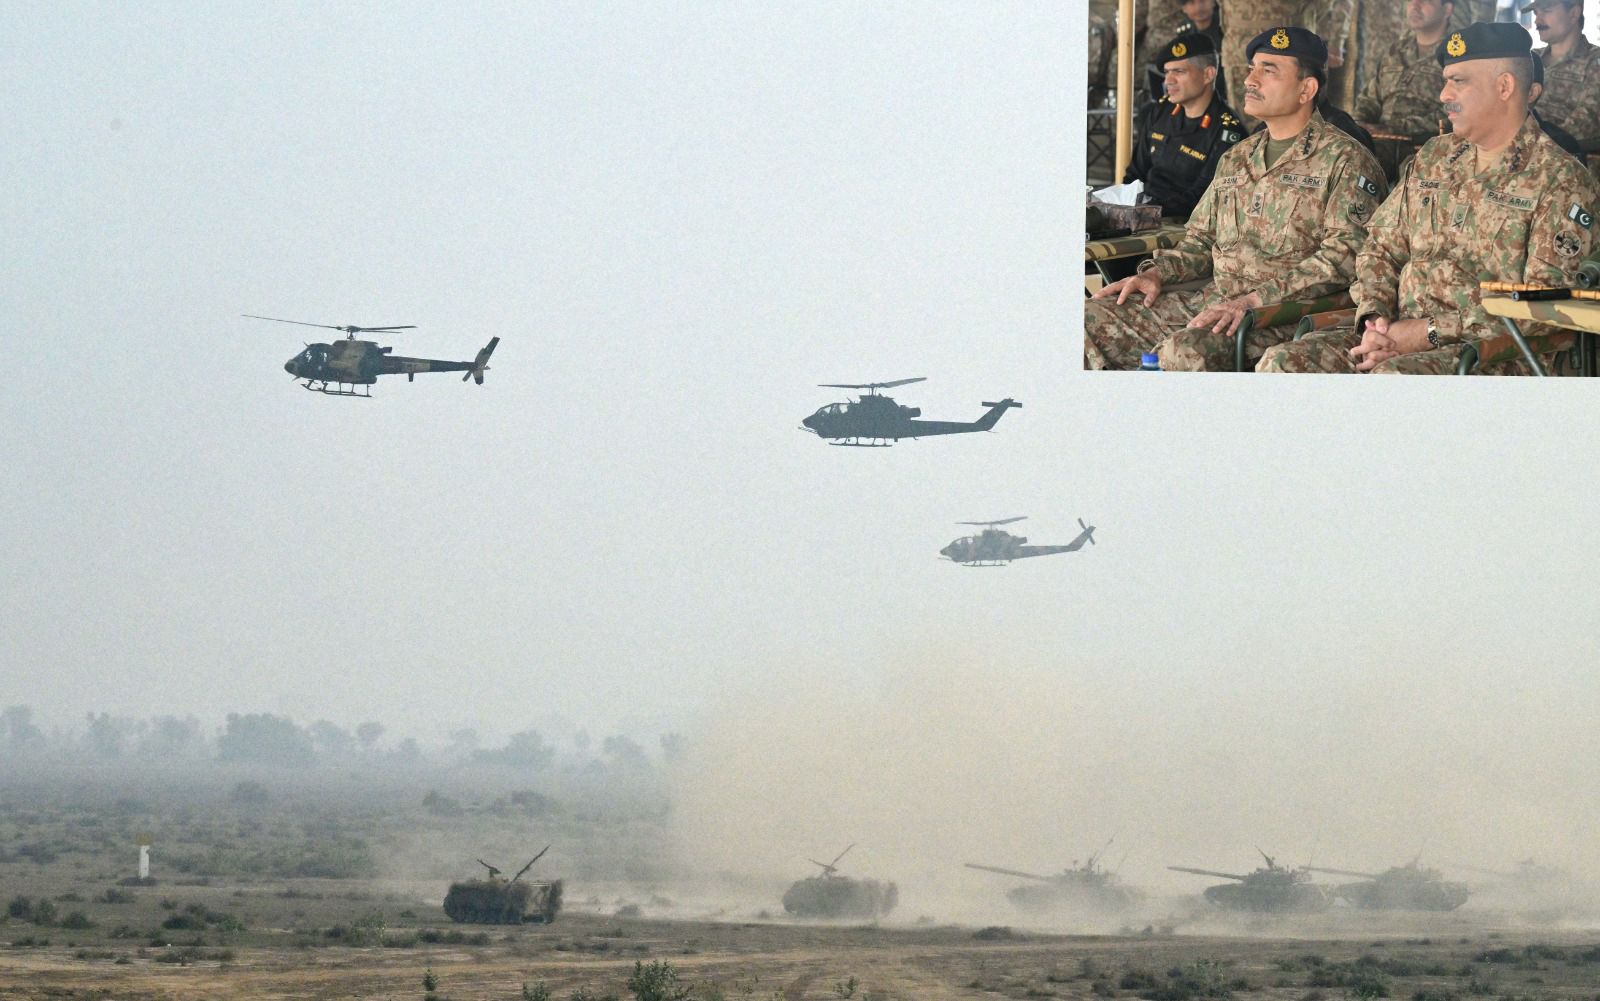 COAS visited troops at Khairpur Tamewali (KPT) to witness Field Exercise of Bahawalpur Corps.